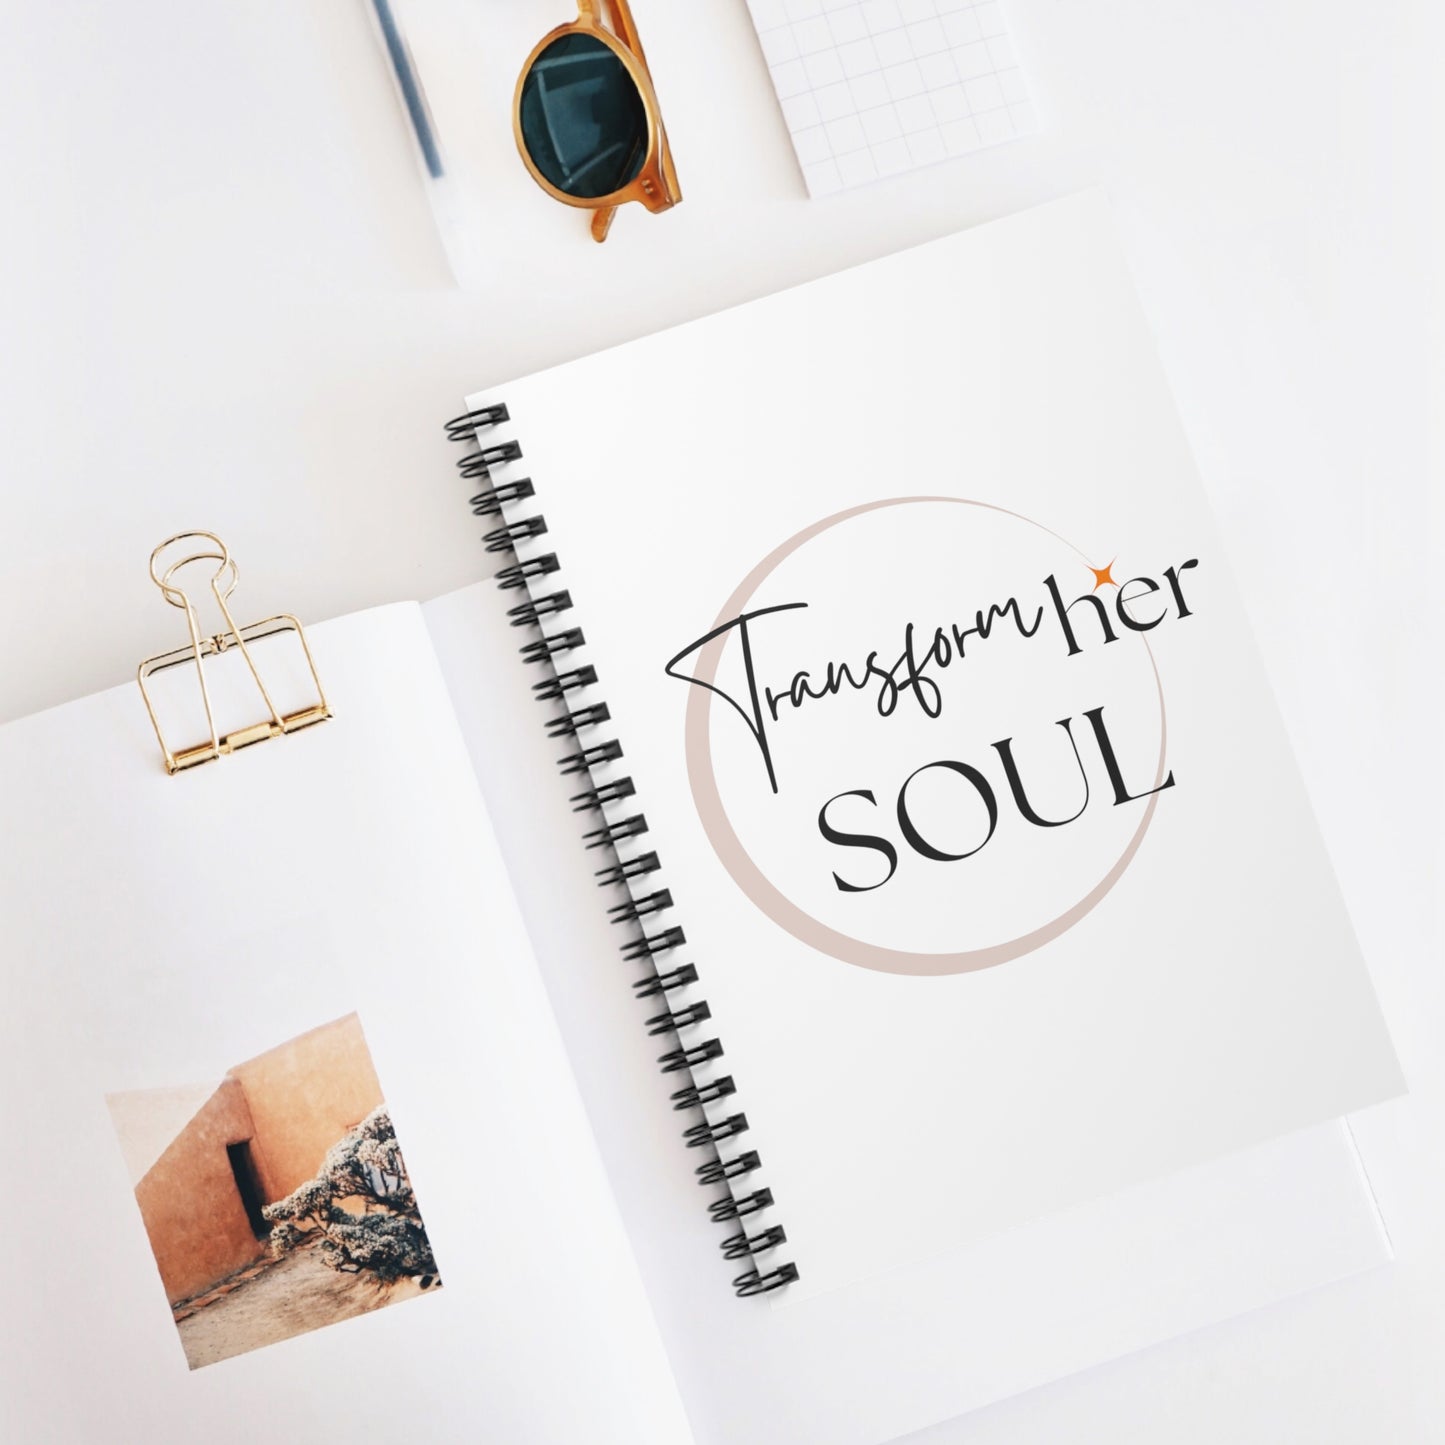 Transformher Soul Spiral Notebook - Ruled Line